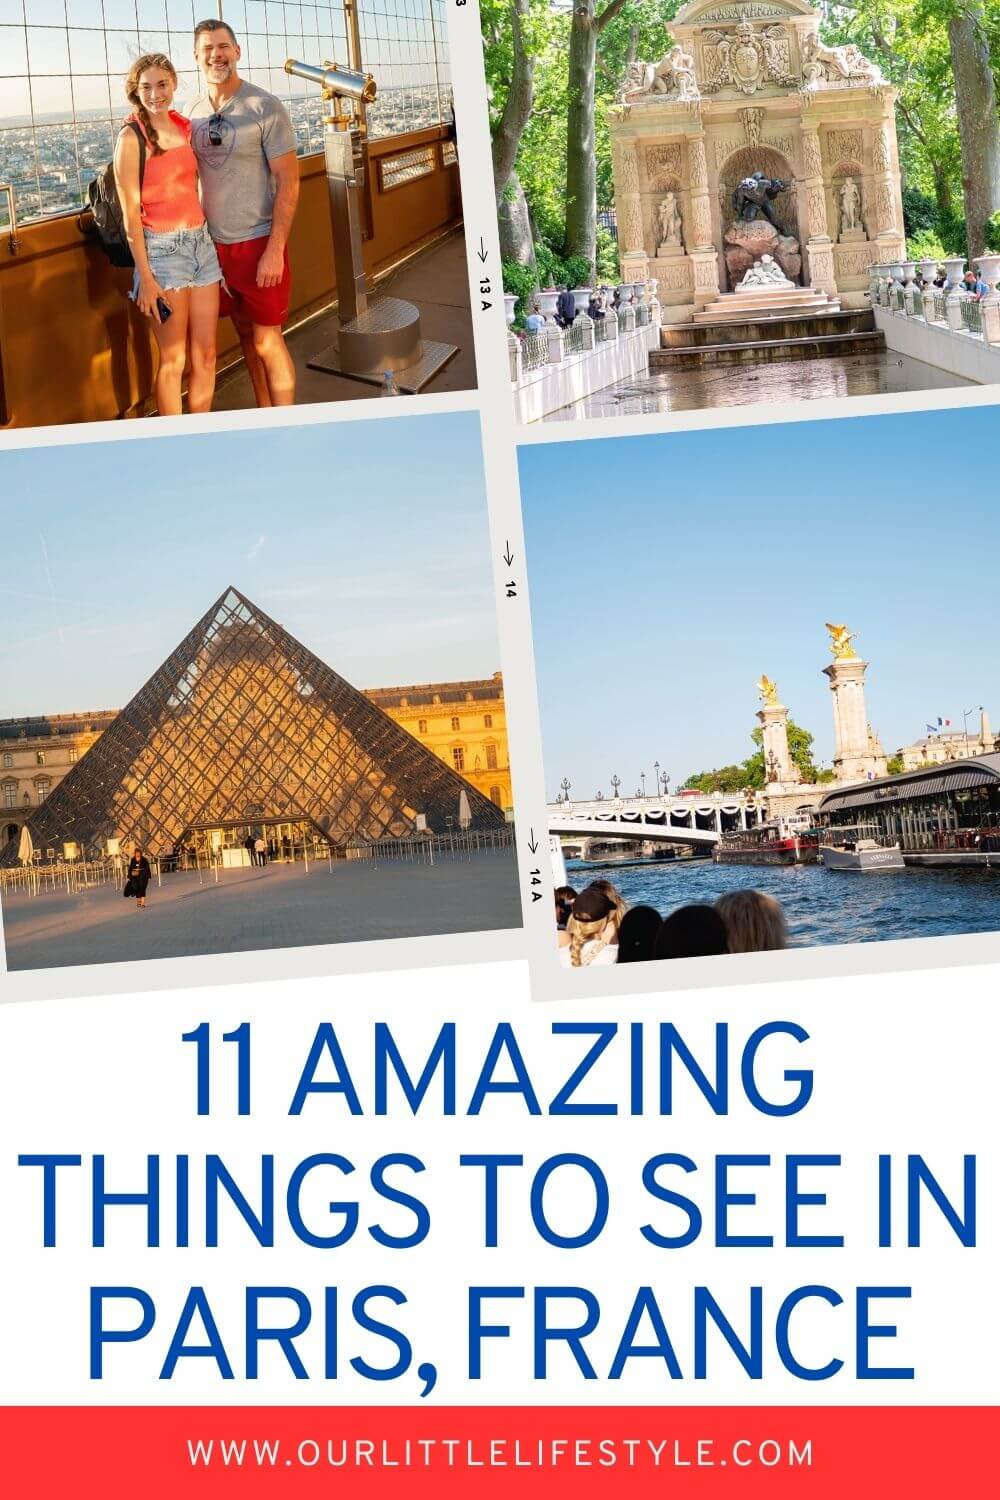 11 amazing things to see in paris france